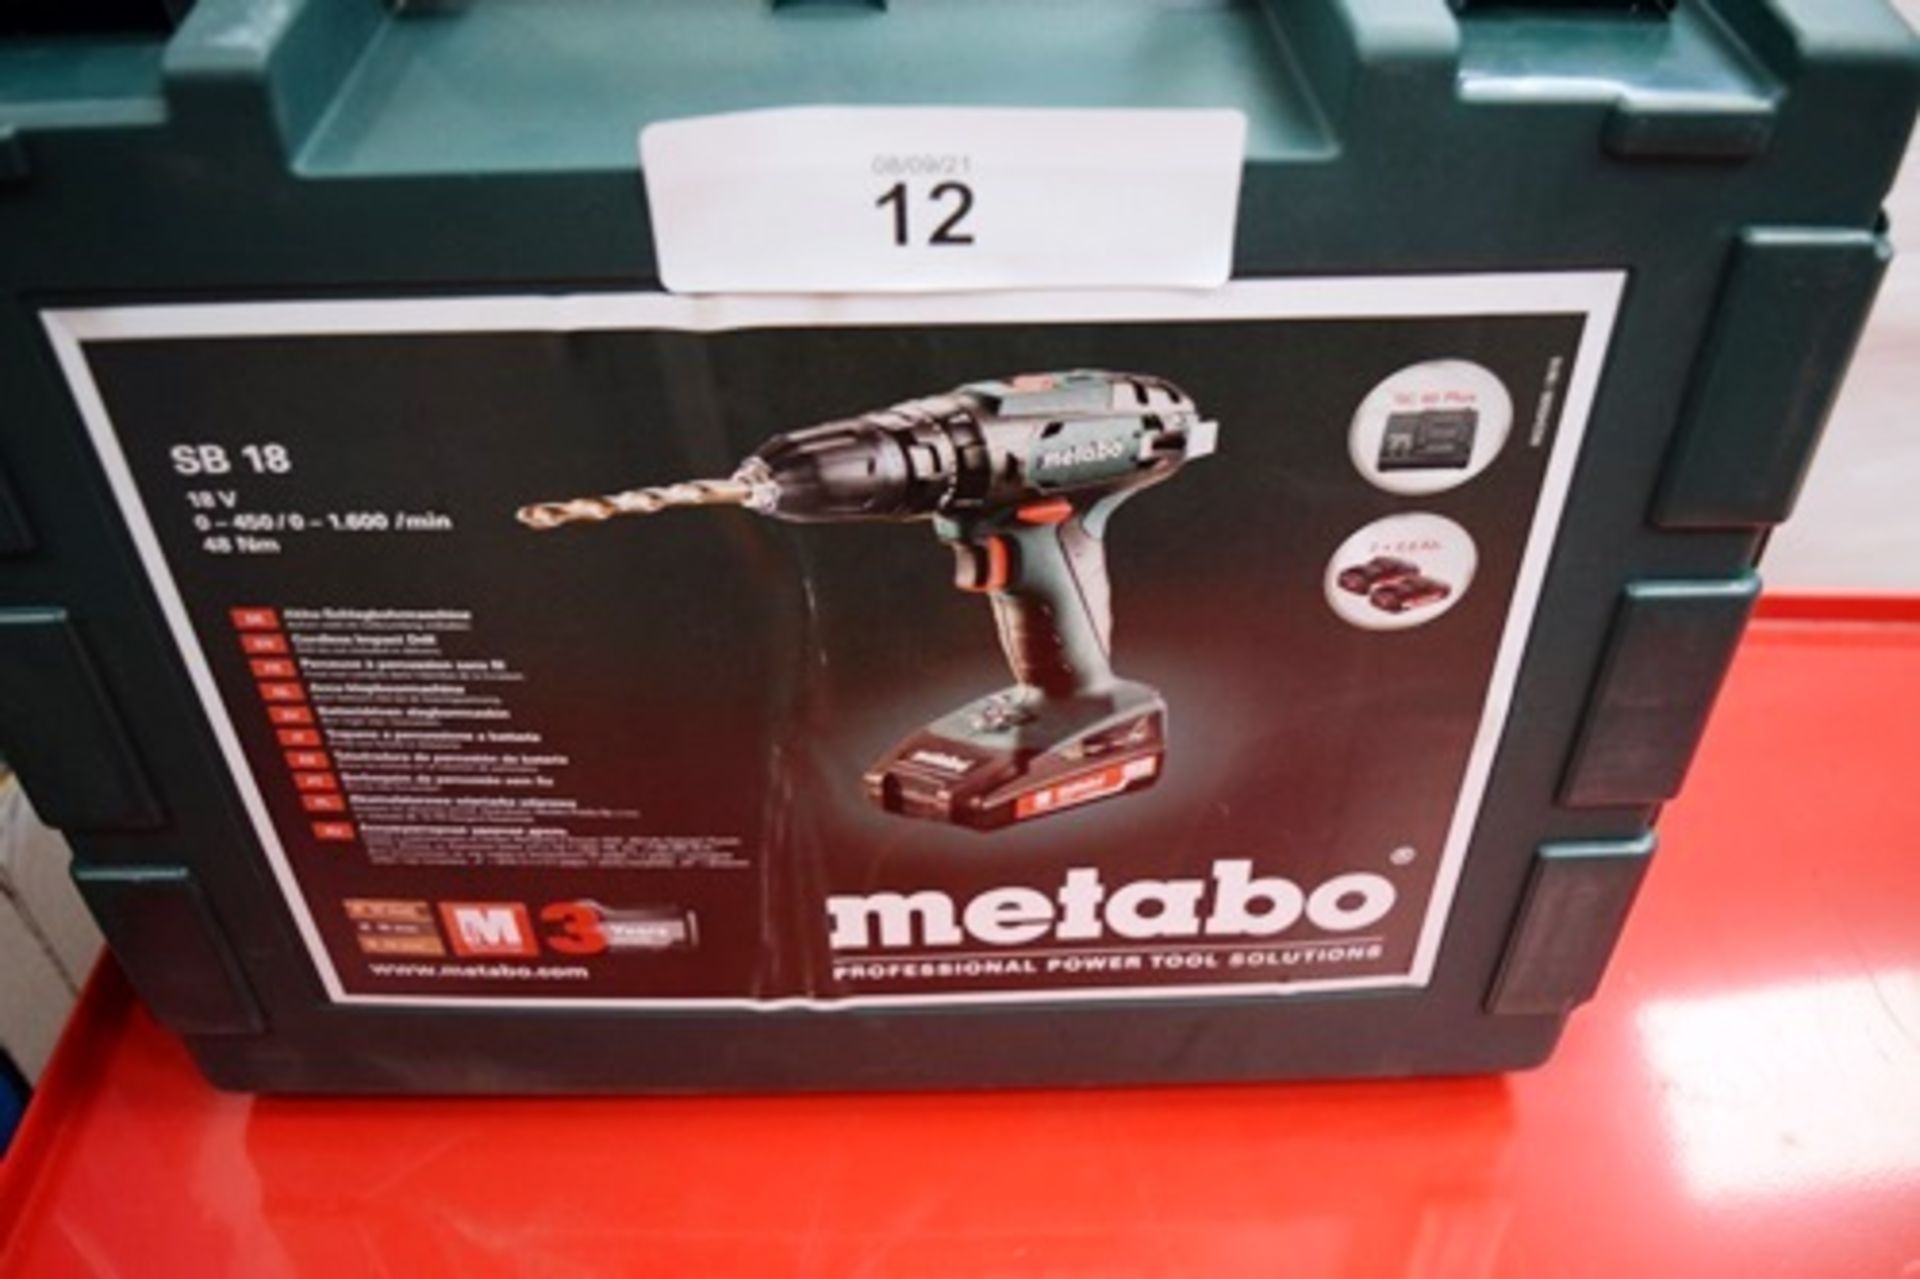 1 x Metabo 18V cordless drill, model SB18 + SC60 Plus, with 1 x 18V 2.0Ah battery, charger, manual - Image 3 of 4